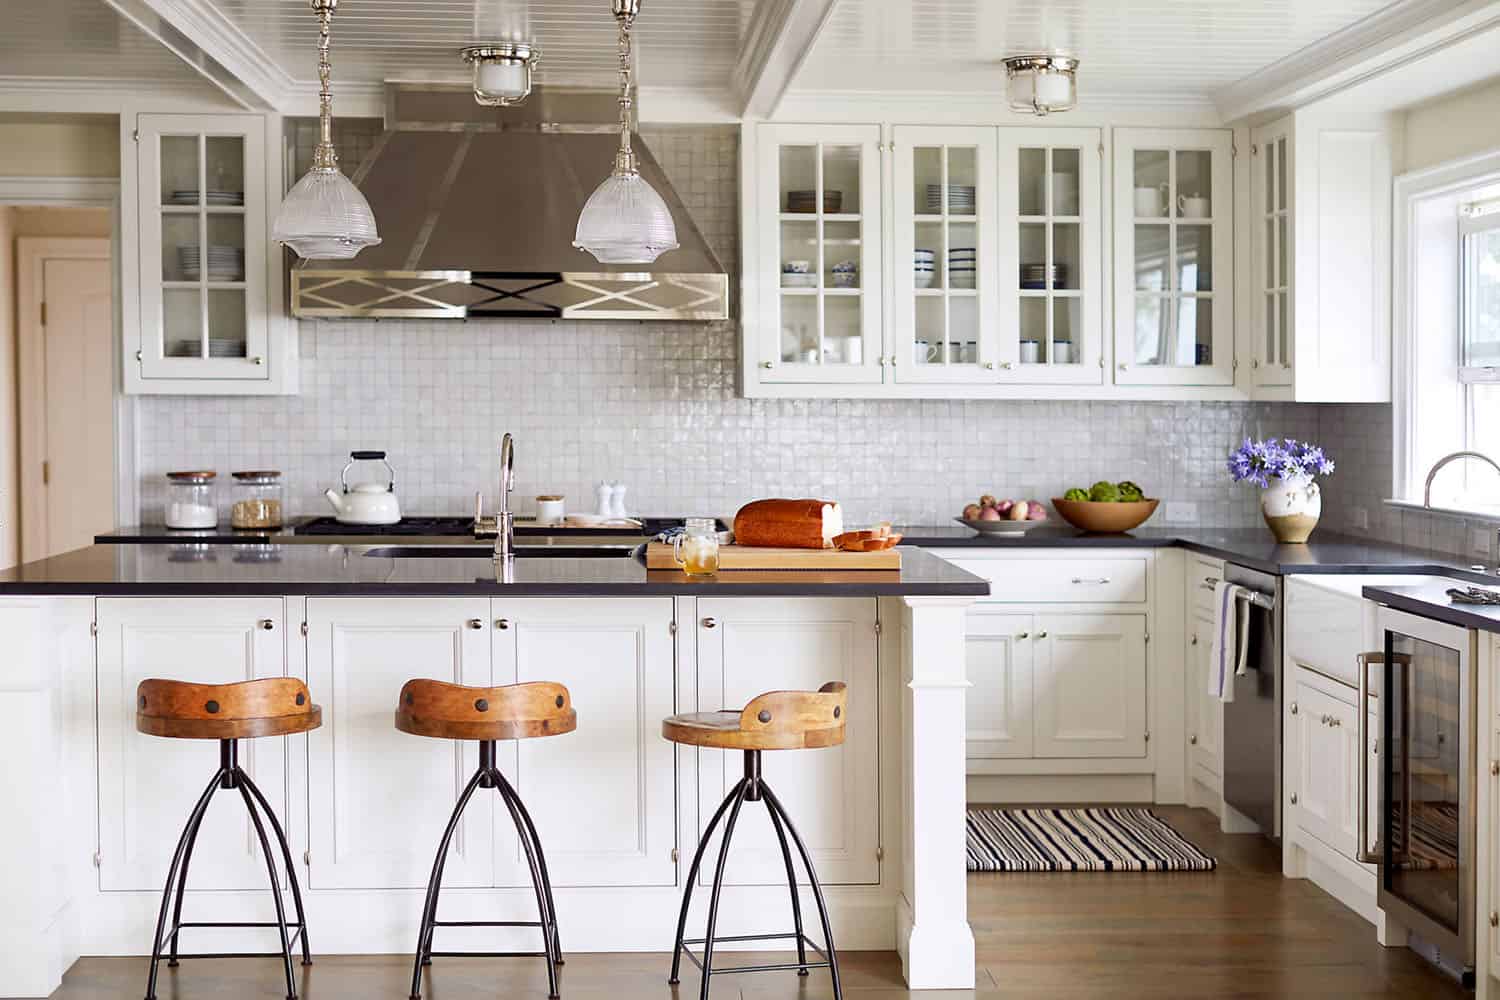 Free up Your Counter Space with These Kitchen Organizing Ideas